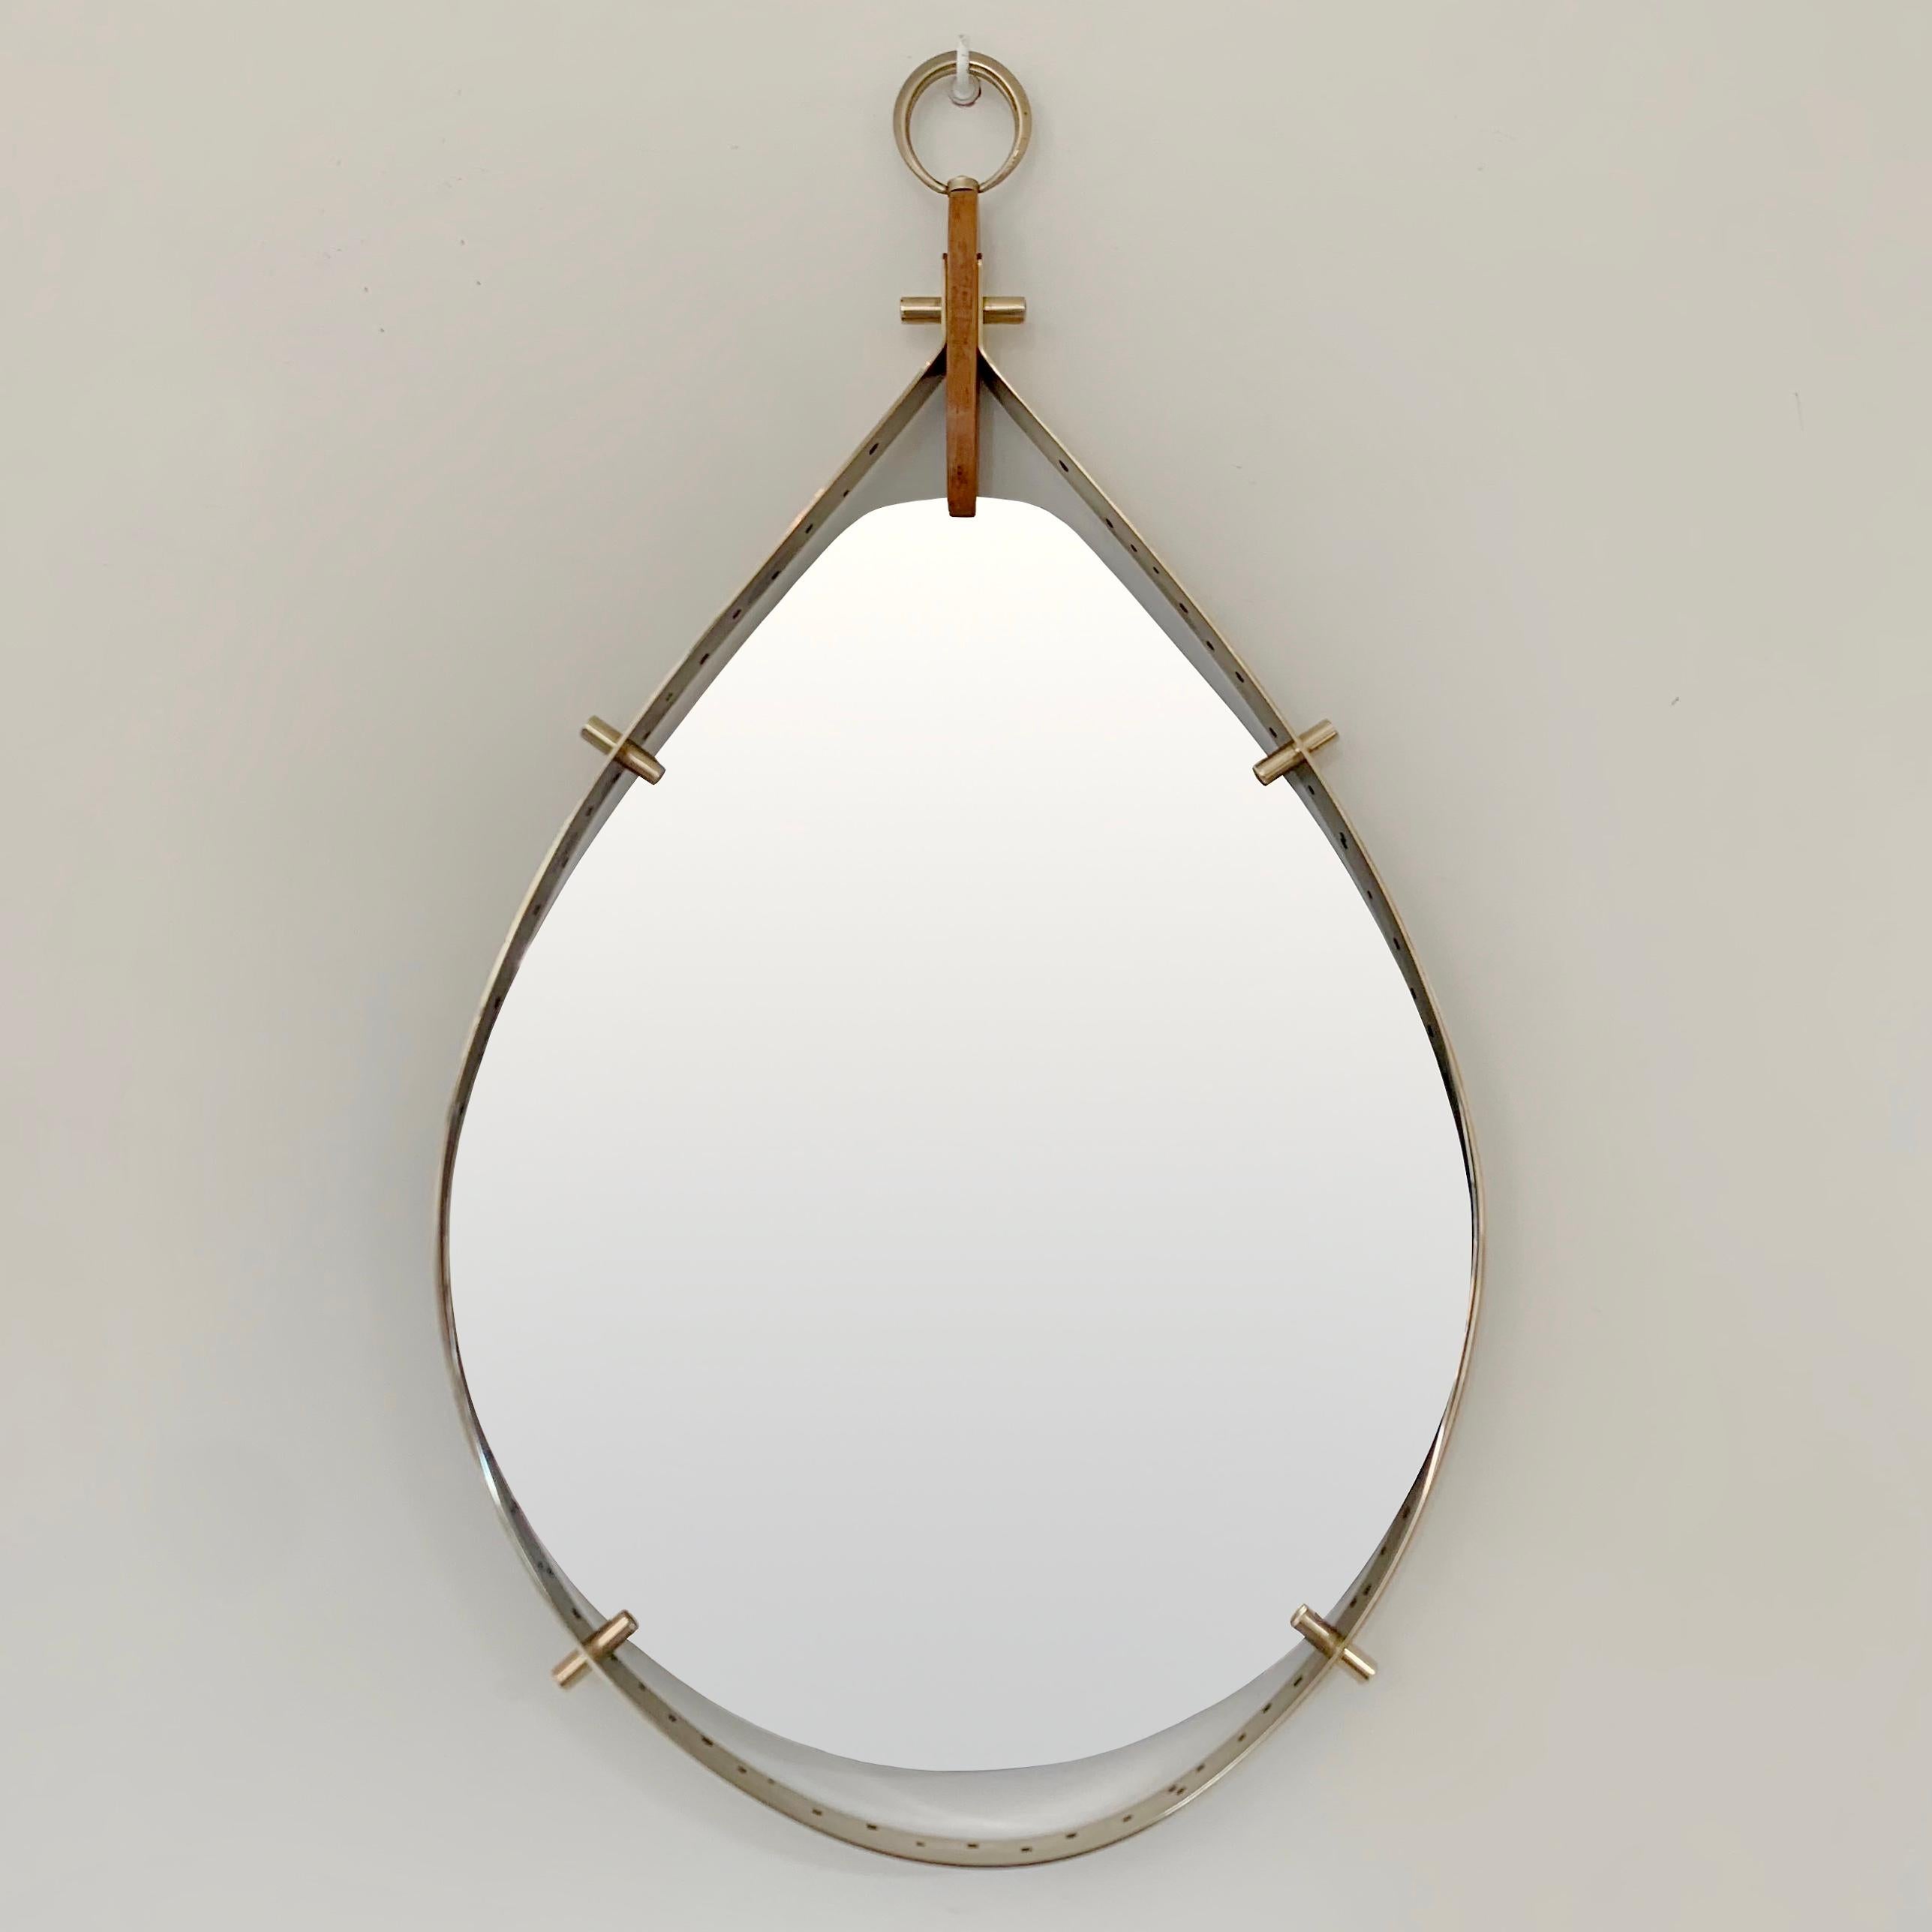 Rare decorative mid-century teardrop shaped mirror by Santambrogio & De Berti, circa 1960, Italy.
Polished brass, wood.
Dimensions: 66 cm H, 38 cm W, 3 cm D.
Original condition.
All purchases are covered by our Buyer Protection Guarantee.
This item